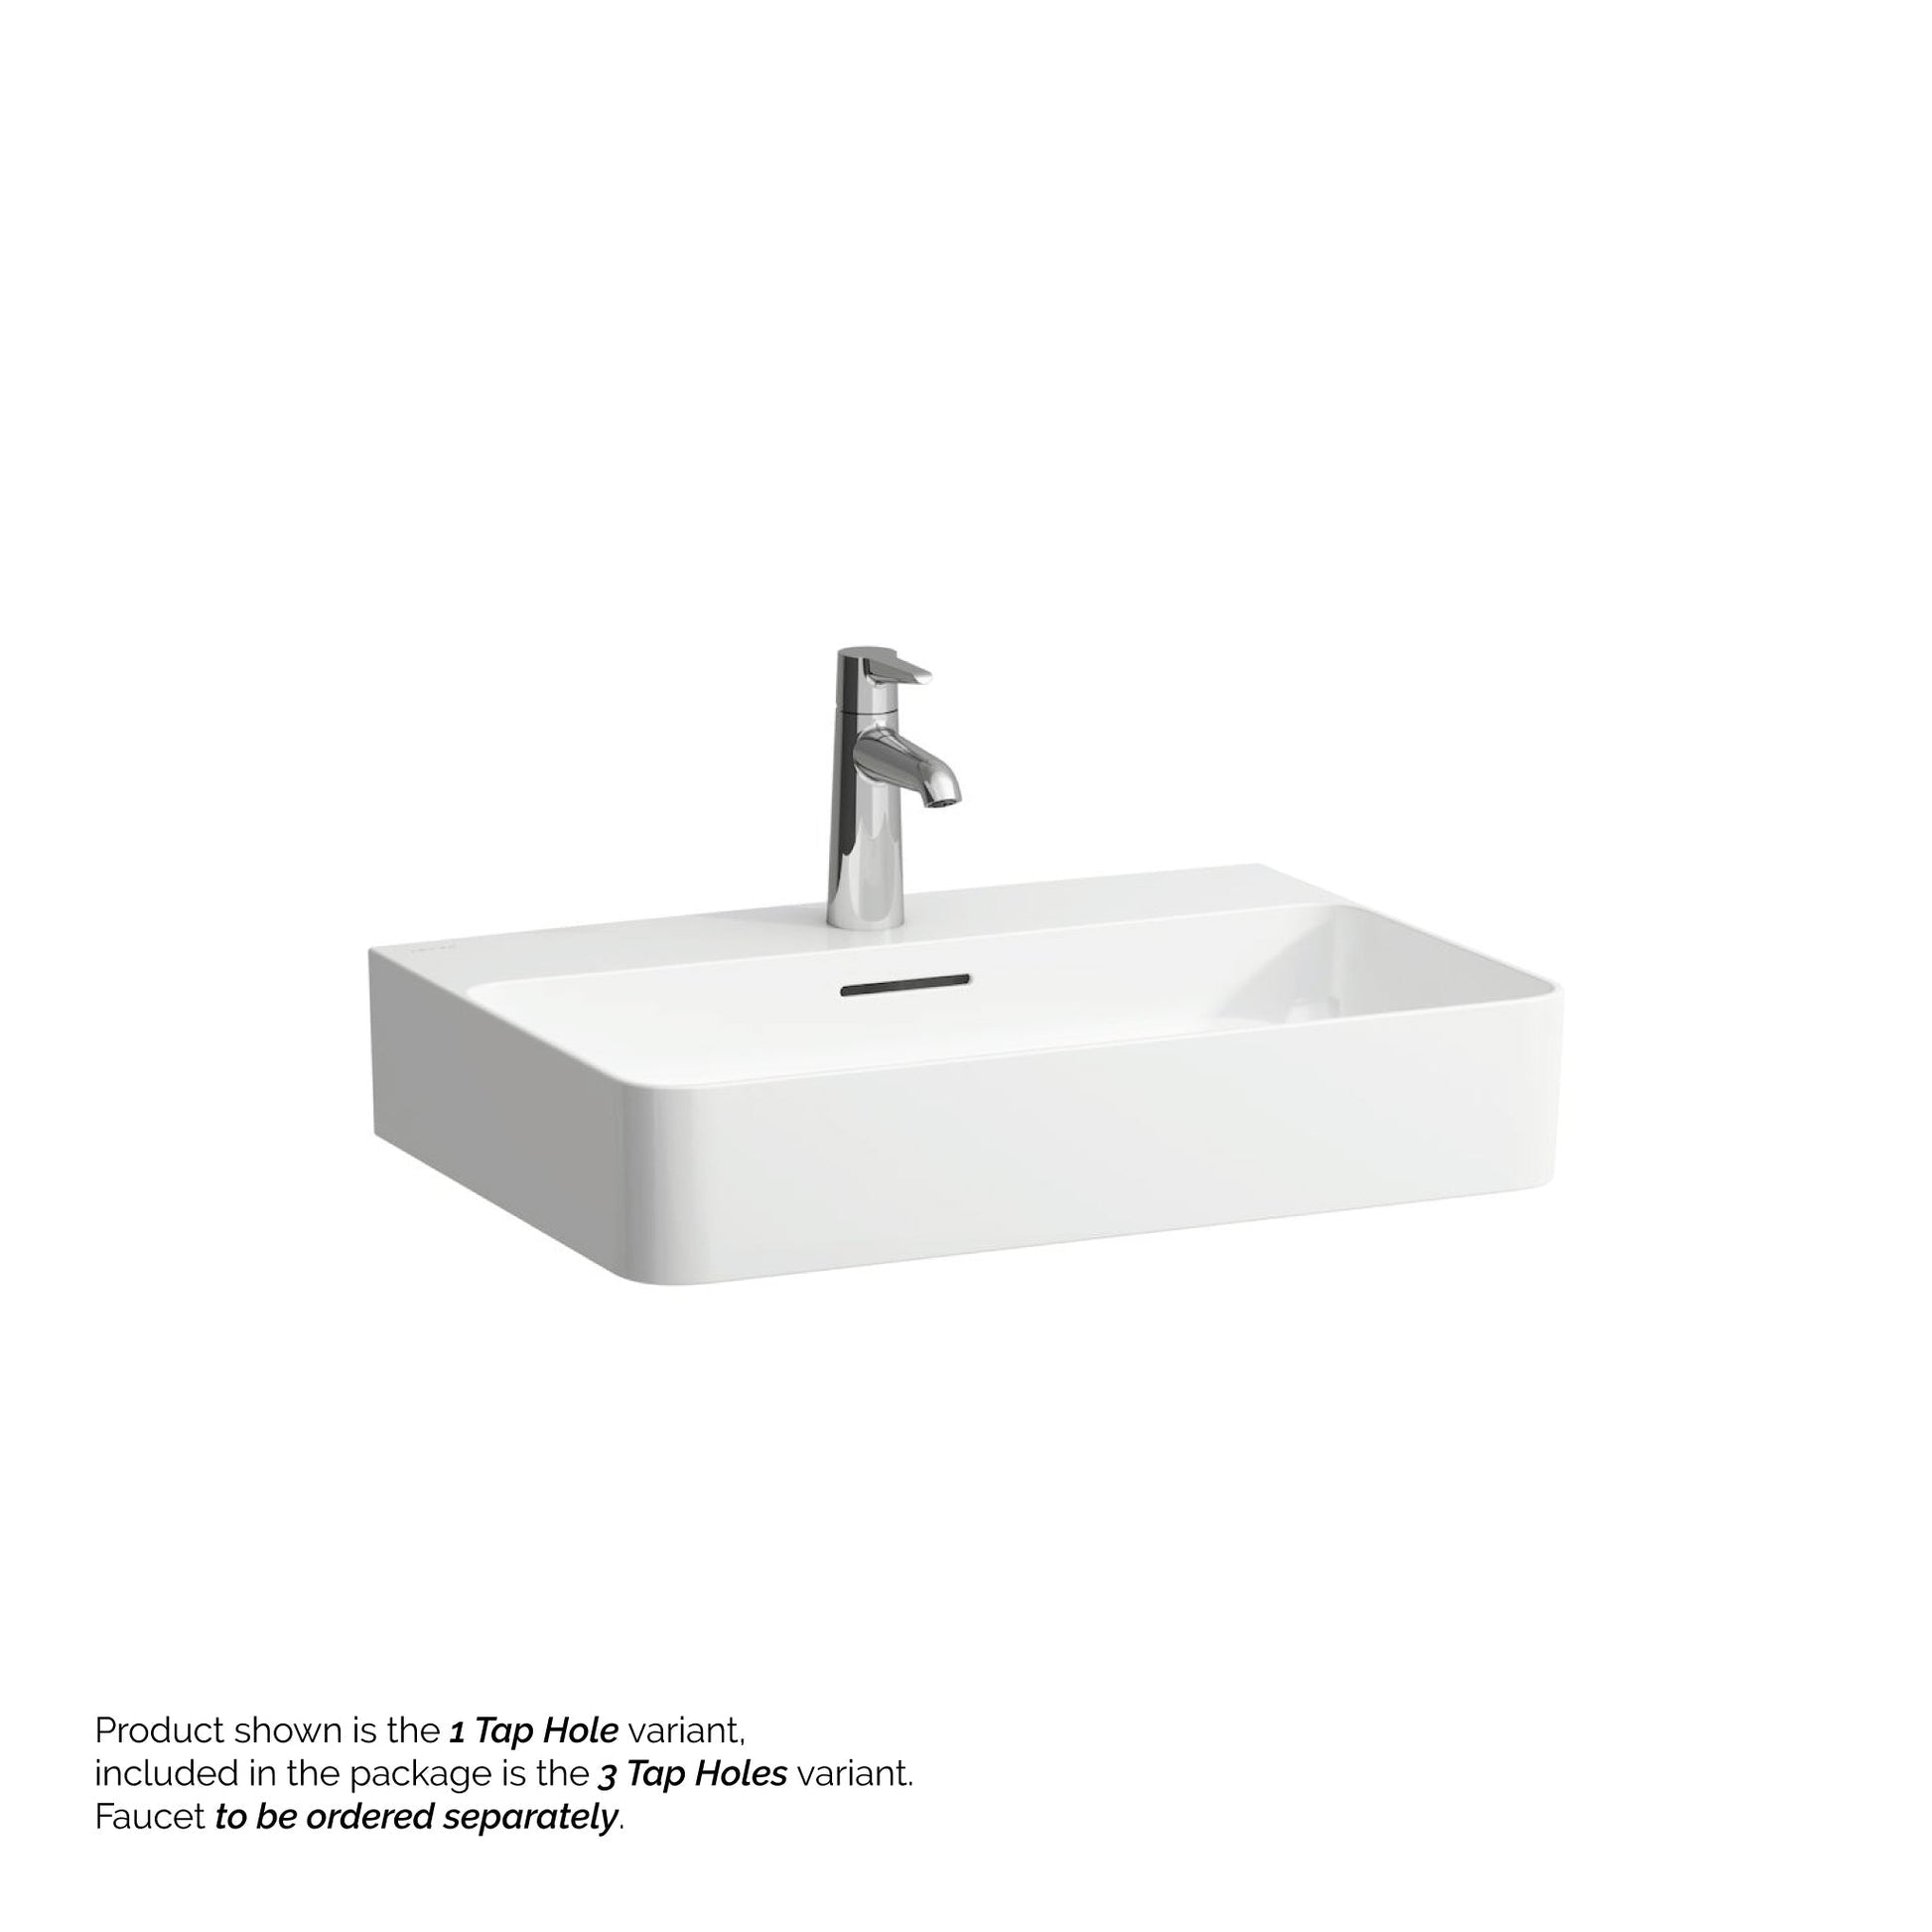 Laufen Val 24" x 17" Matte White Ceramic Wall-Mounted Bathroom Sink With 3 Faucet Holes